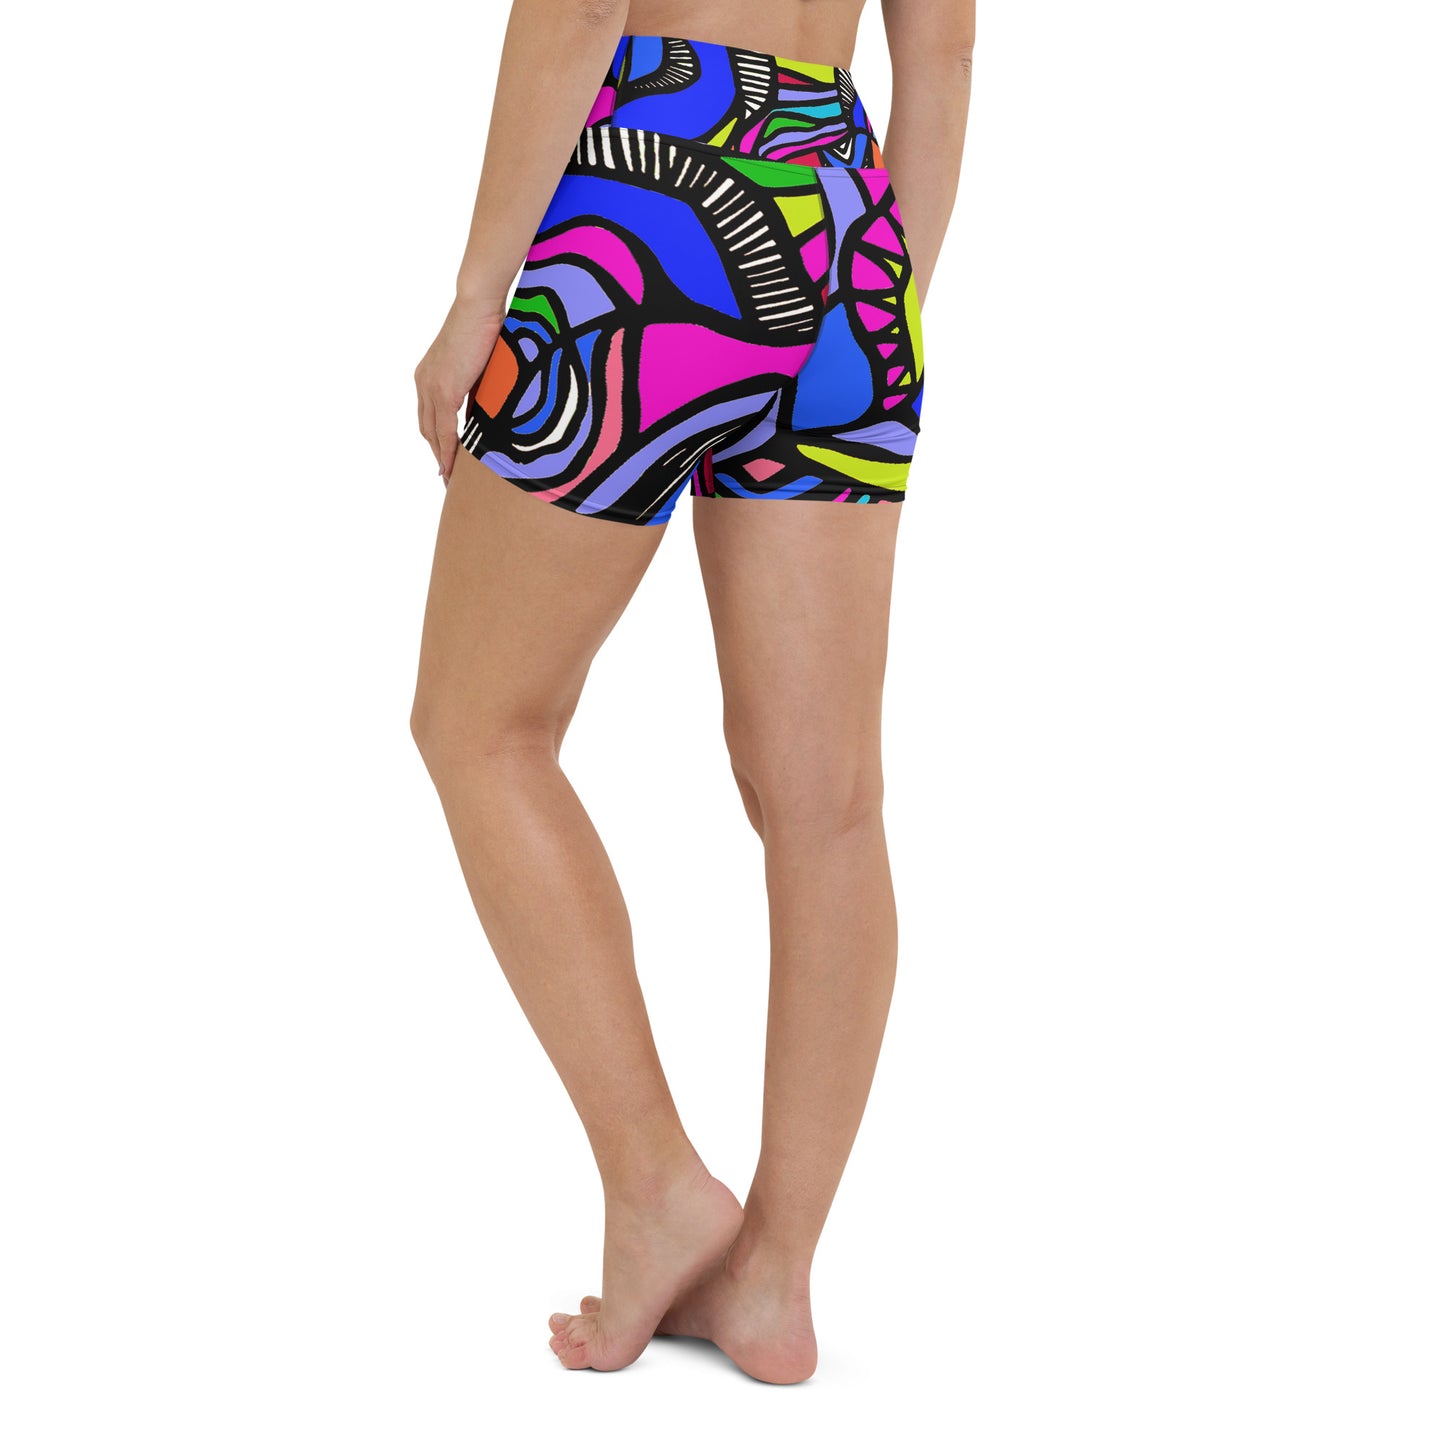 It's a Colorful Whirled Shorts